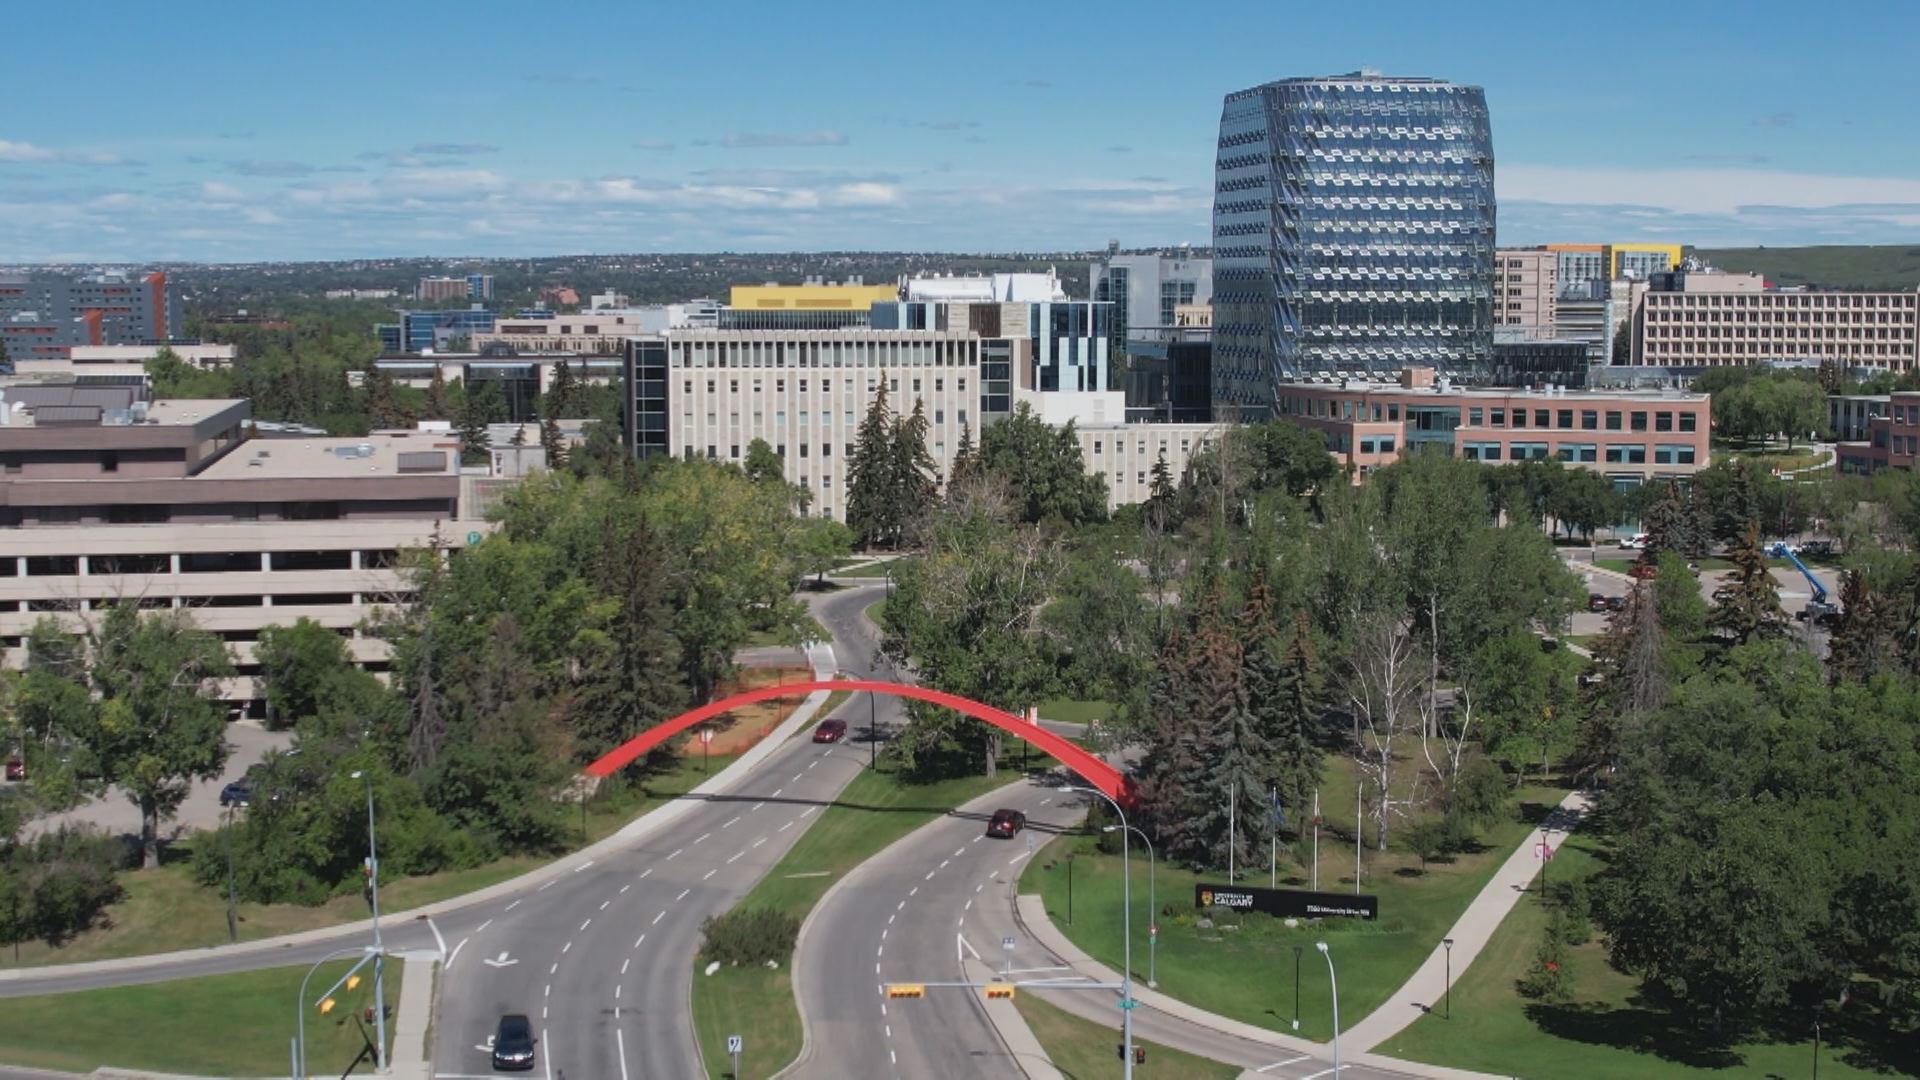 Residence move-in at the University of Calgary highlights housing crisis